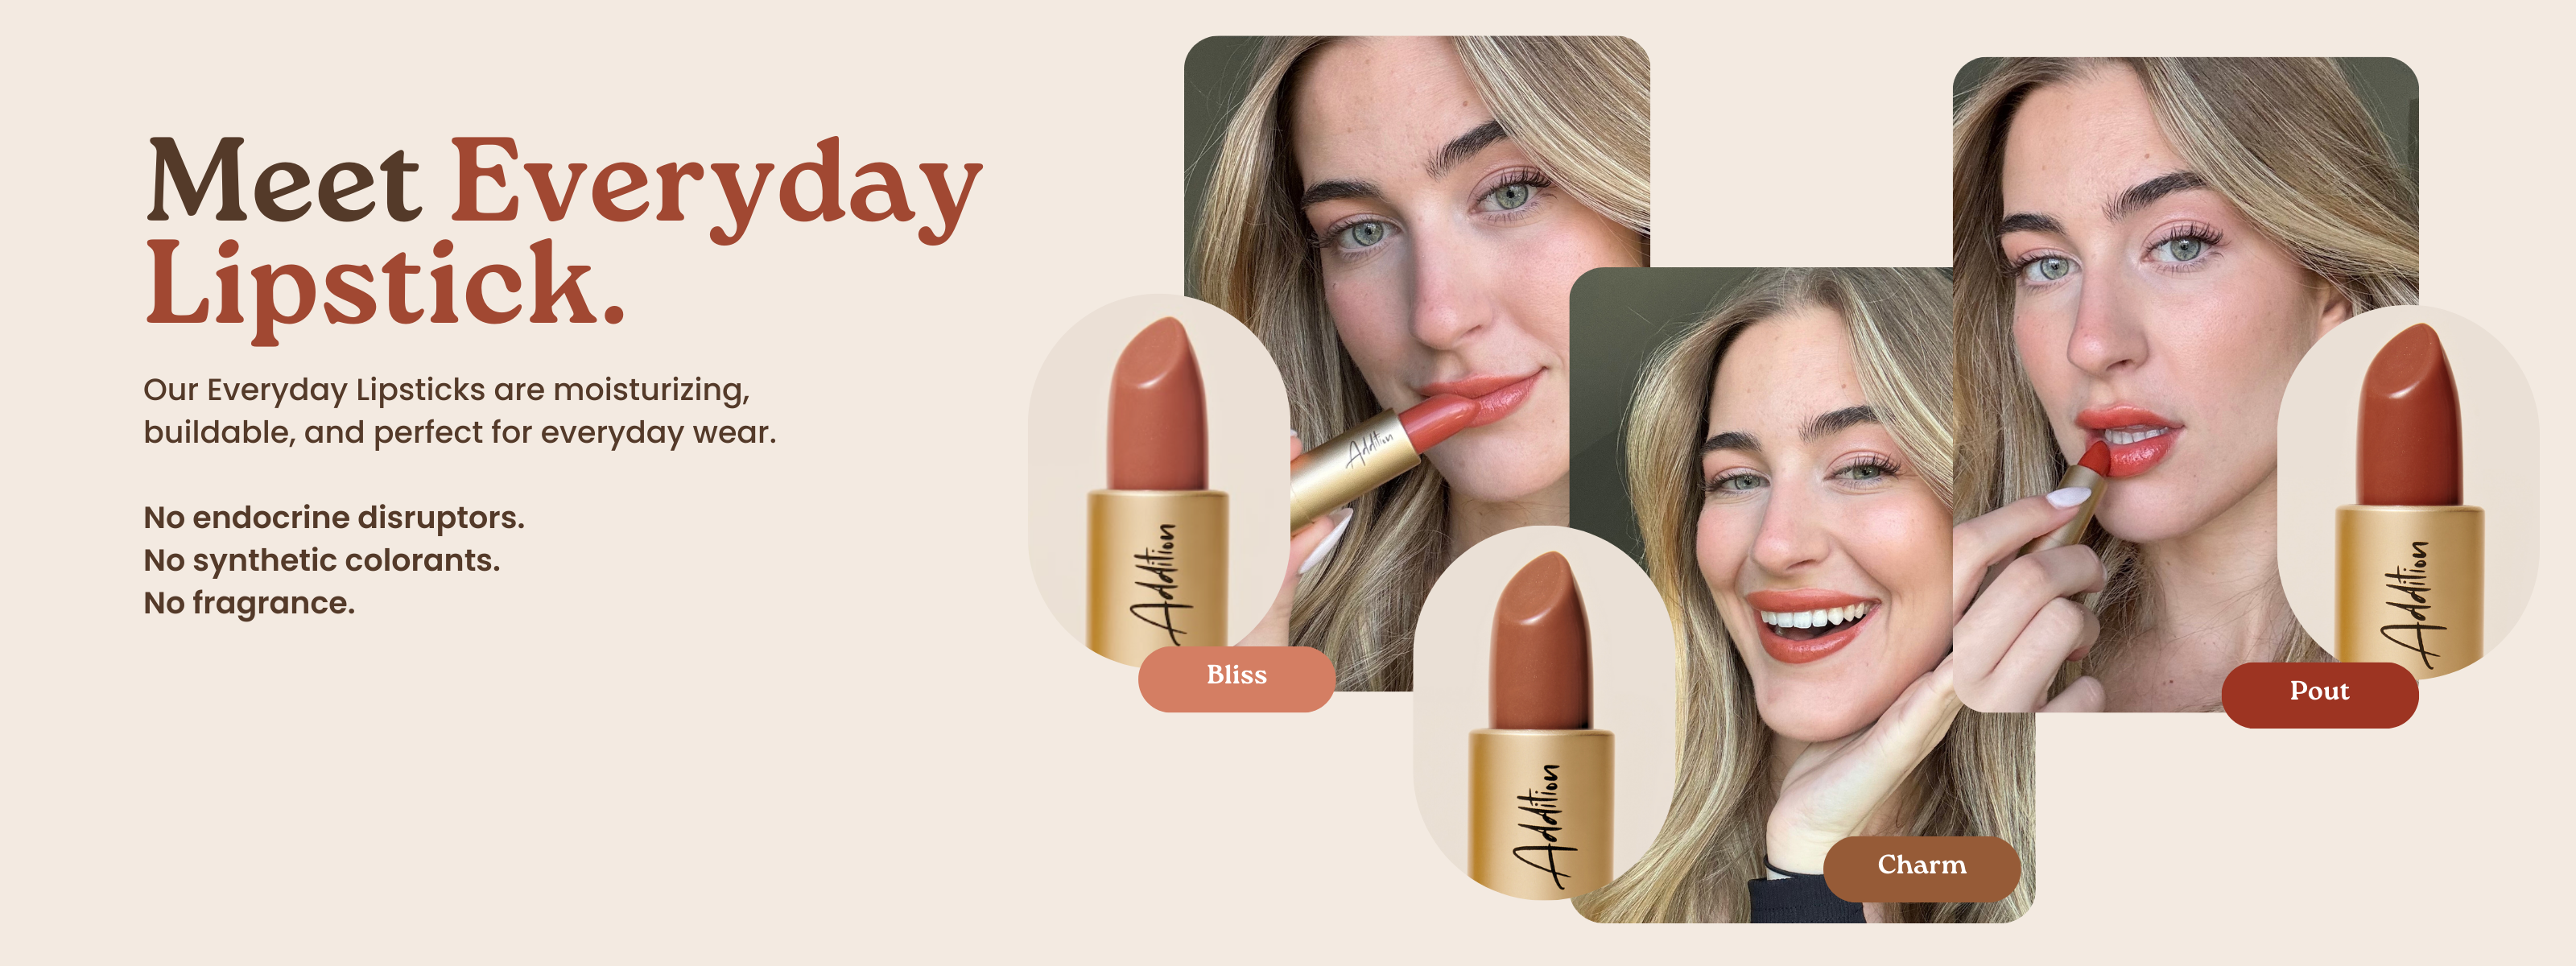 Meet Everyday Lipstick. Our Everyday Lipsticks are moisturizing, buildable, and perfect for everyday wear. No endocrine disruptors. No synthetic colorants. No fragrance.